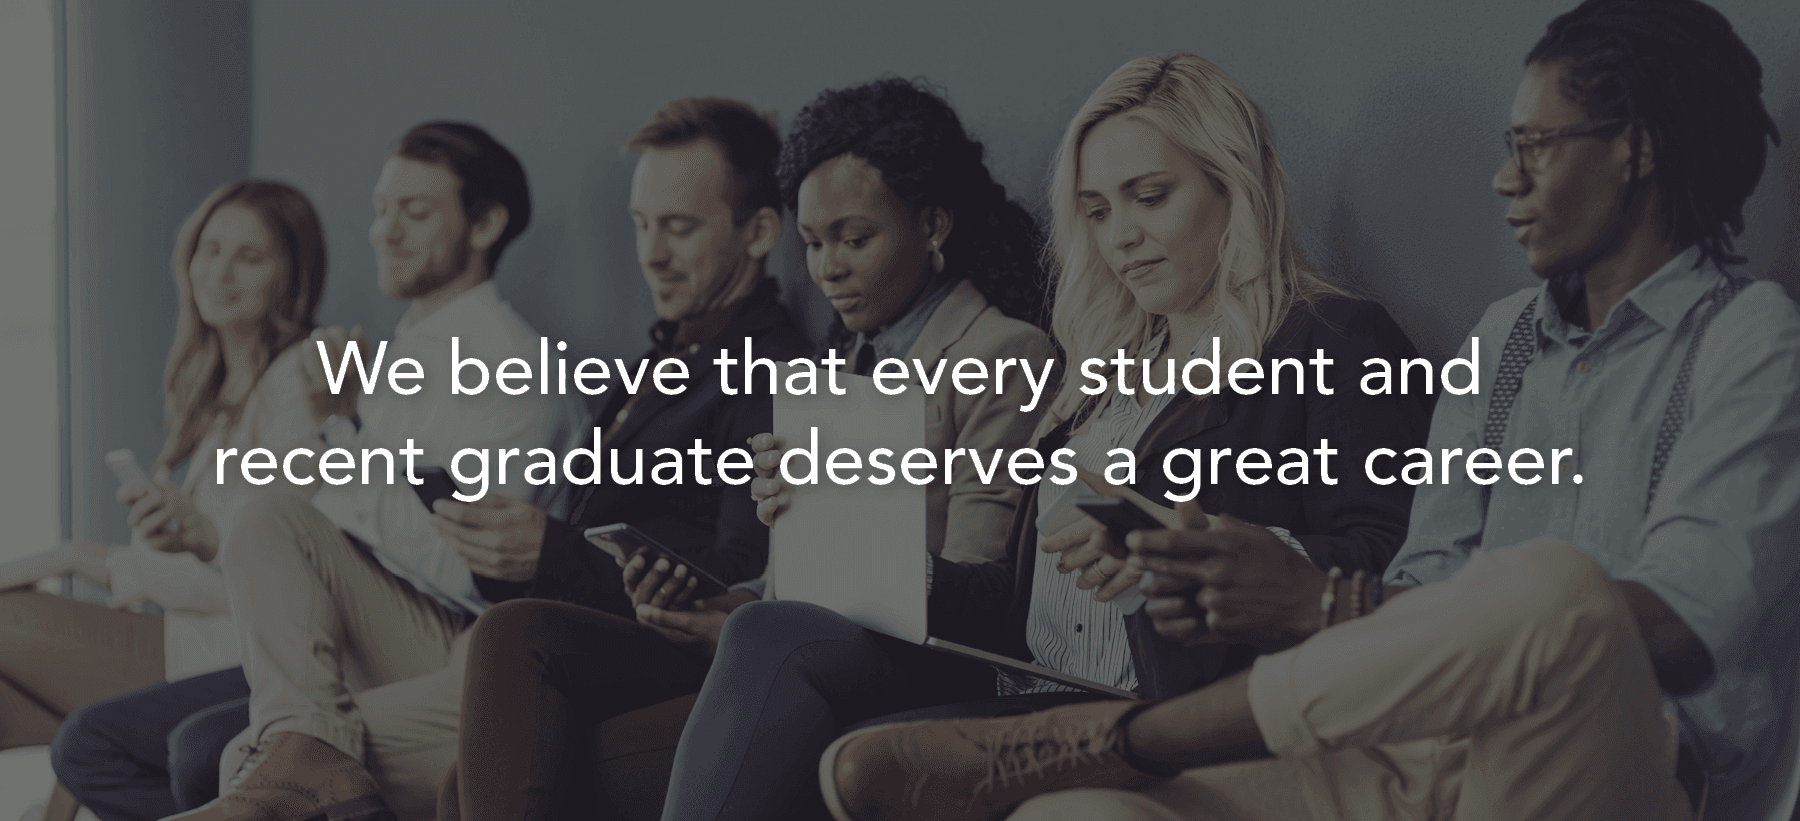 College Recruiter believes that every student and recent graduate deserves a great career